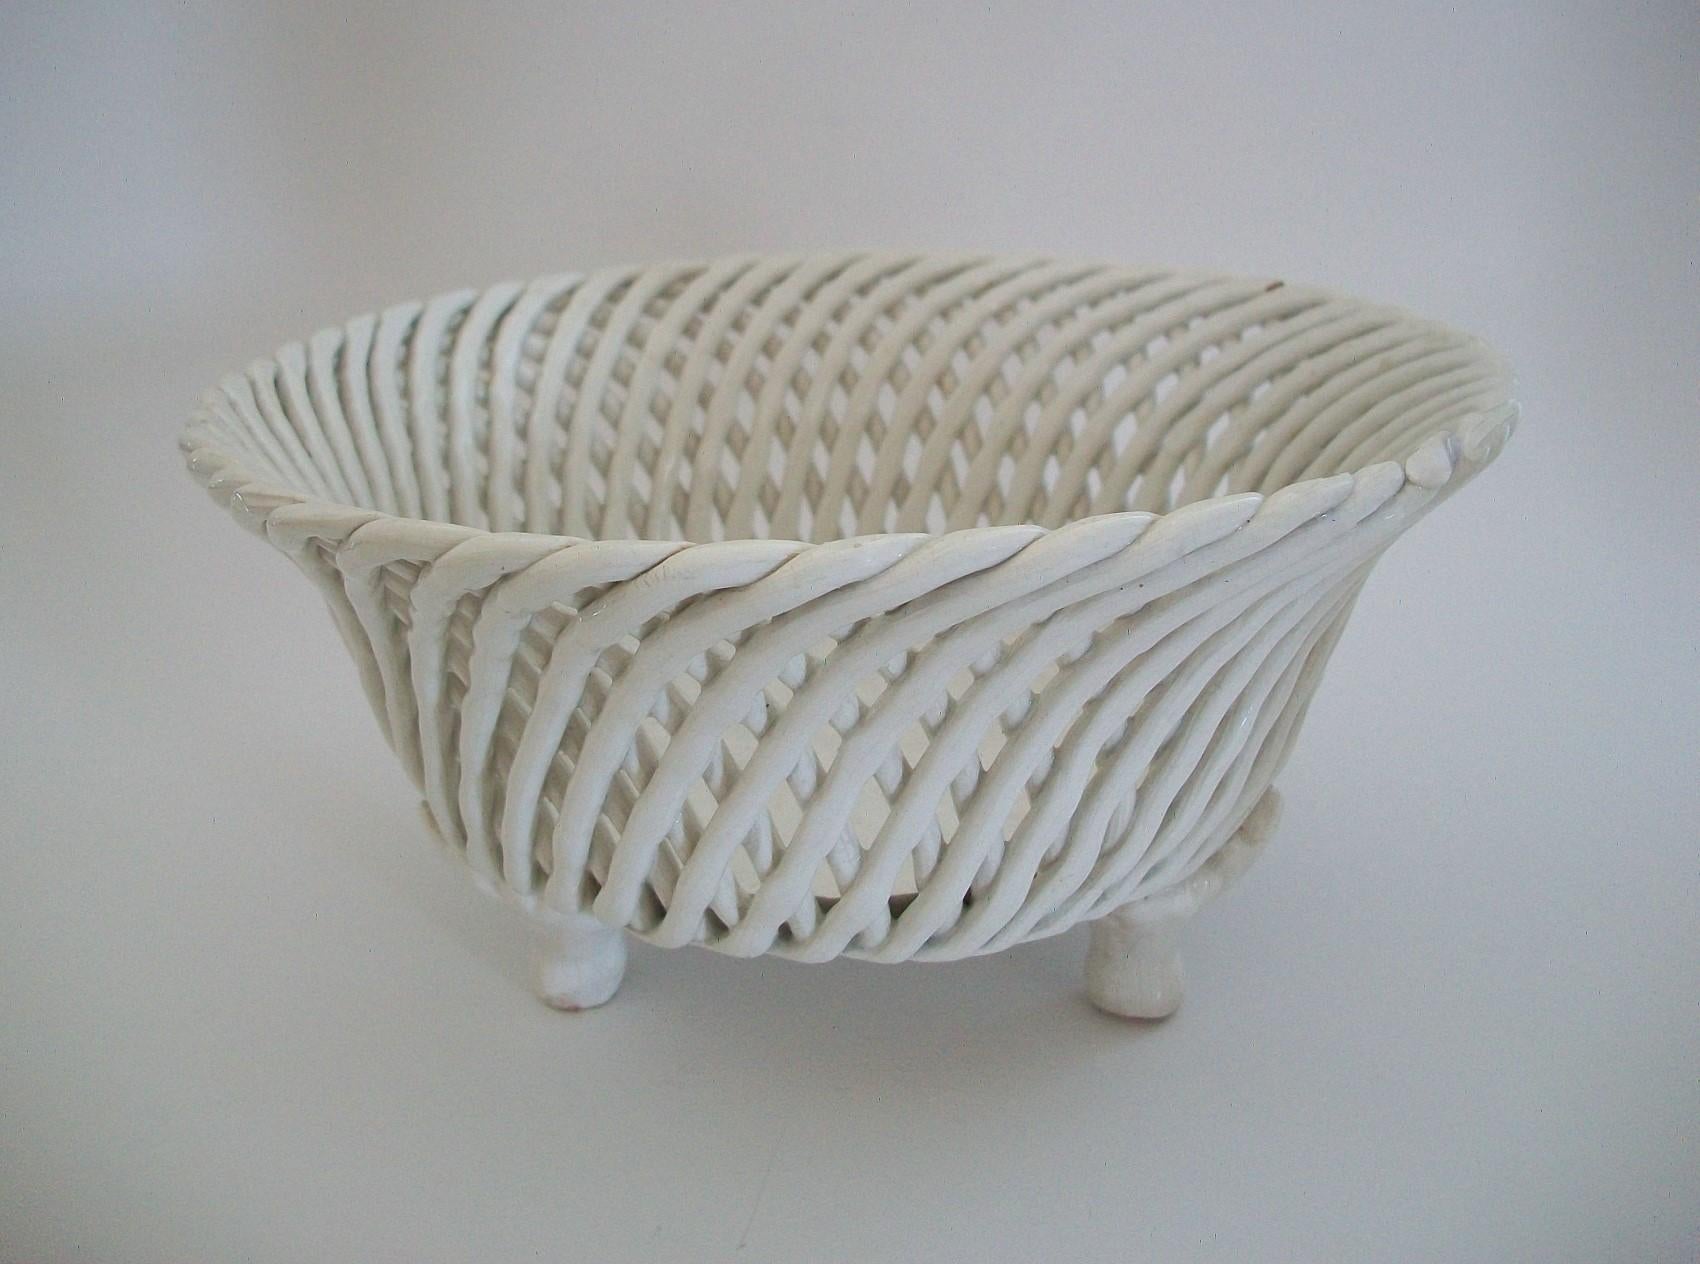 Vintage basket weave ceramic bowl - featuring a white ceramic body with an over-all clear glaze - raised on three feet with acanthus leaf decoration - unsigned - Europe - mid 20th century.

Good vintage condition - one edge chip (as photographed)